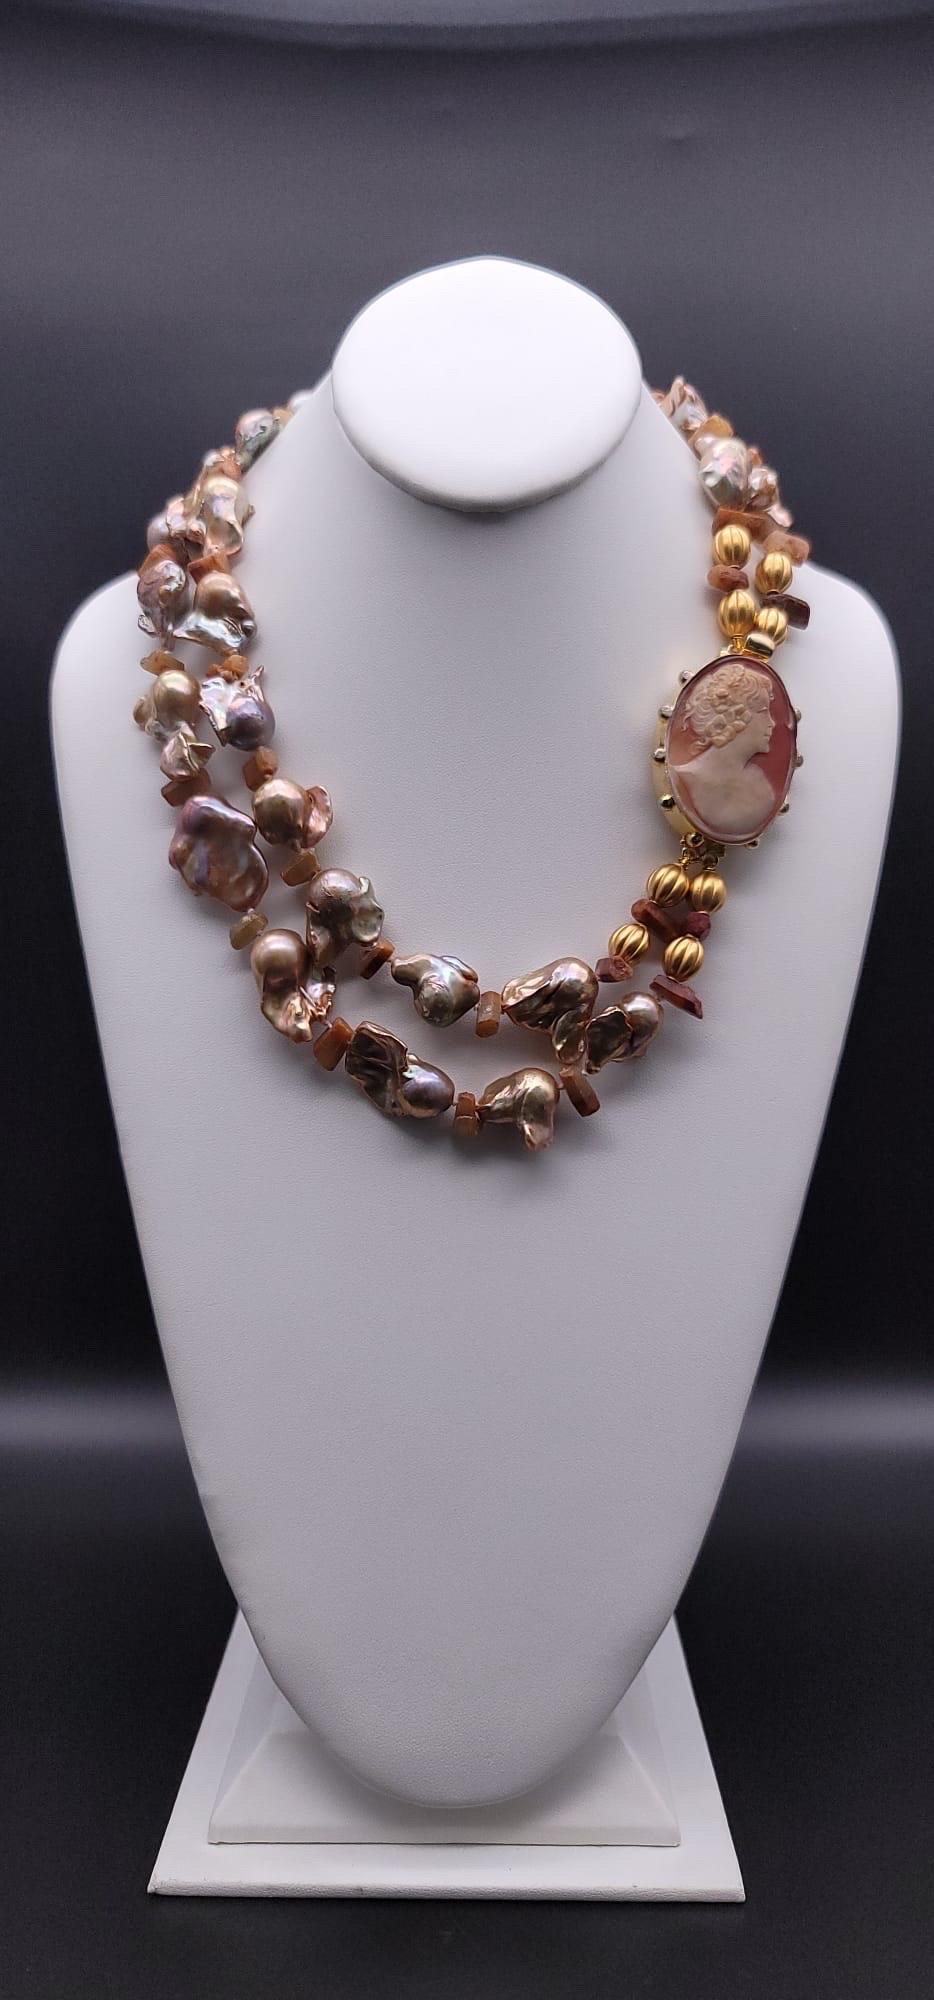 A.Jeschel Stunning Gold Baroque Pearl necklace with an Italian cameo side clasp. 7